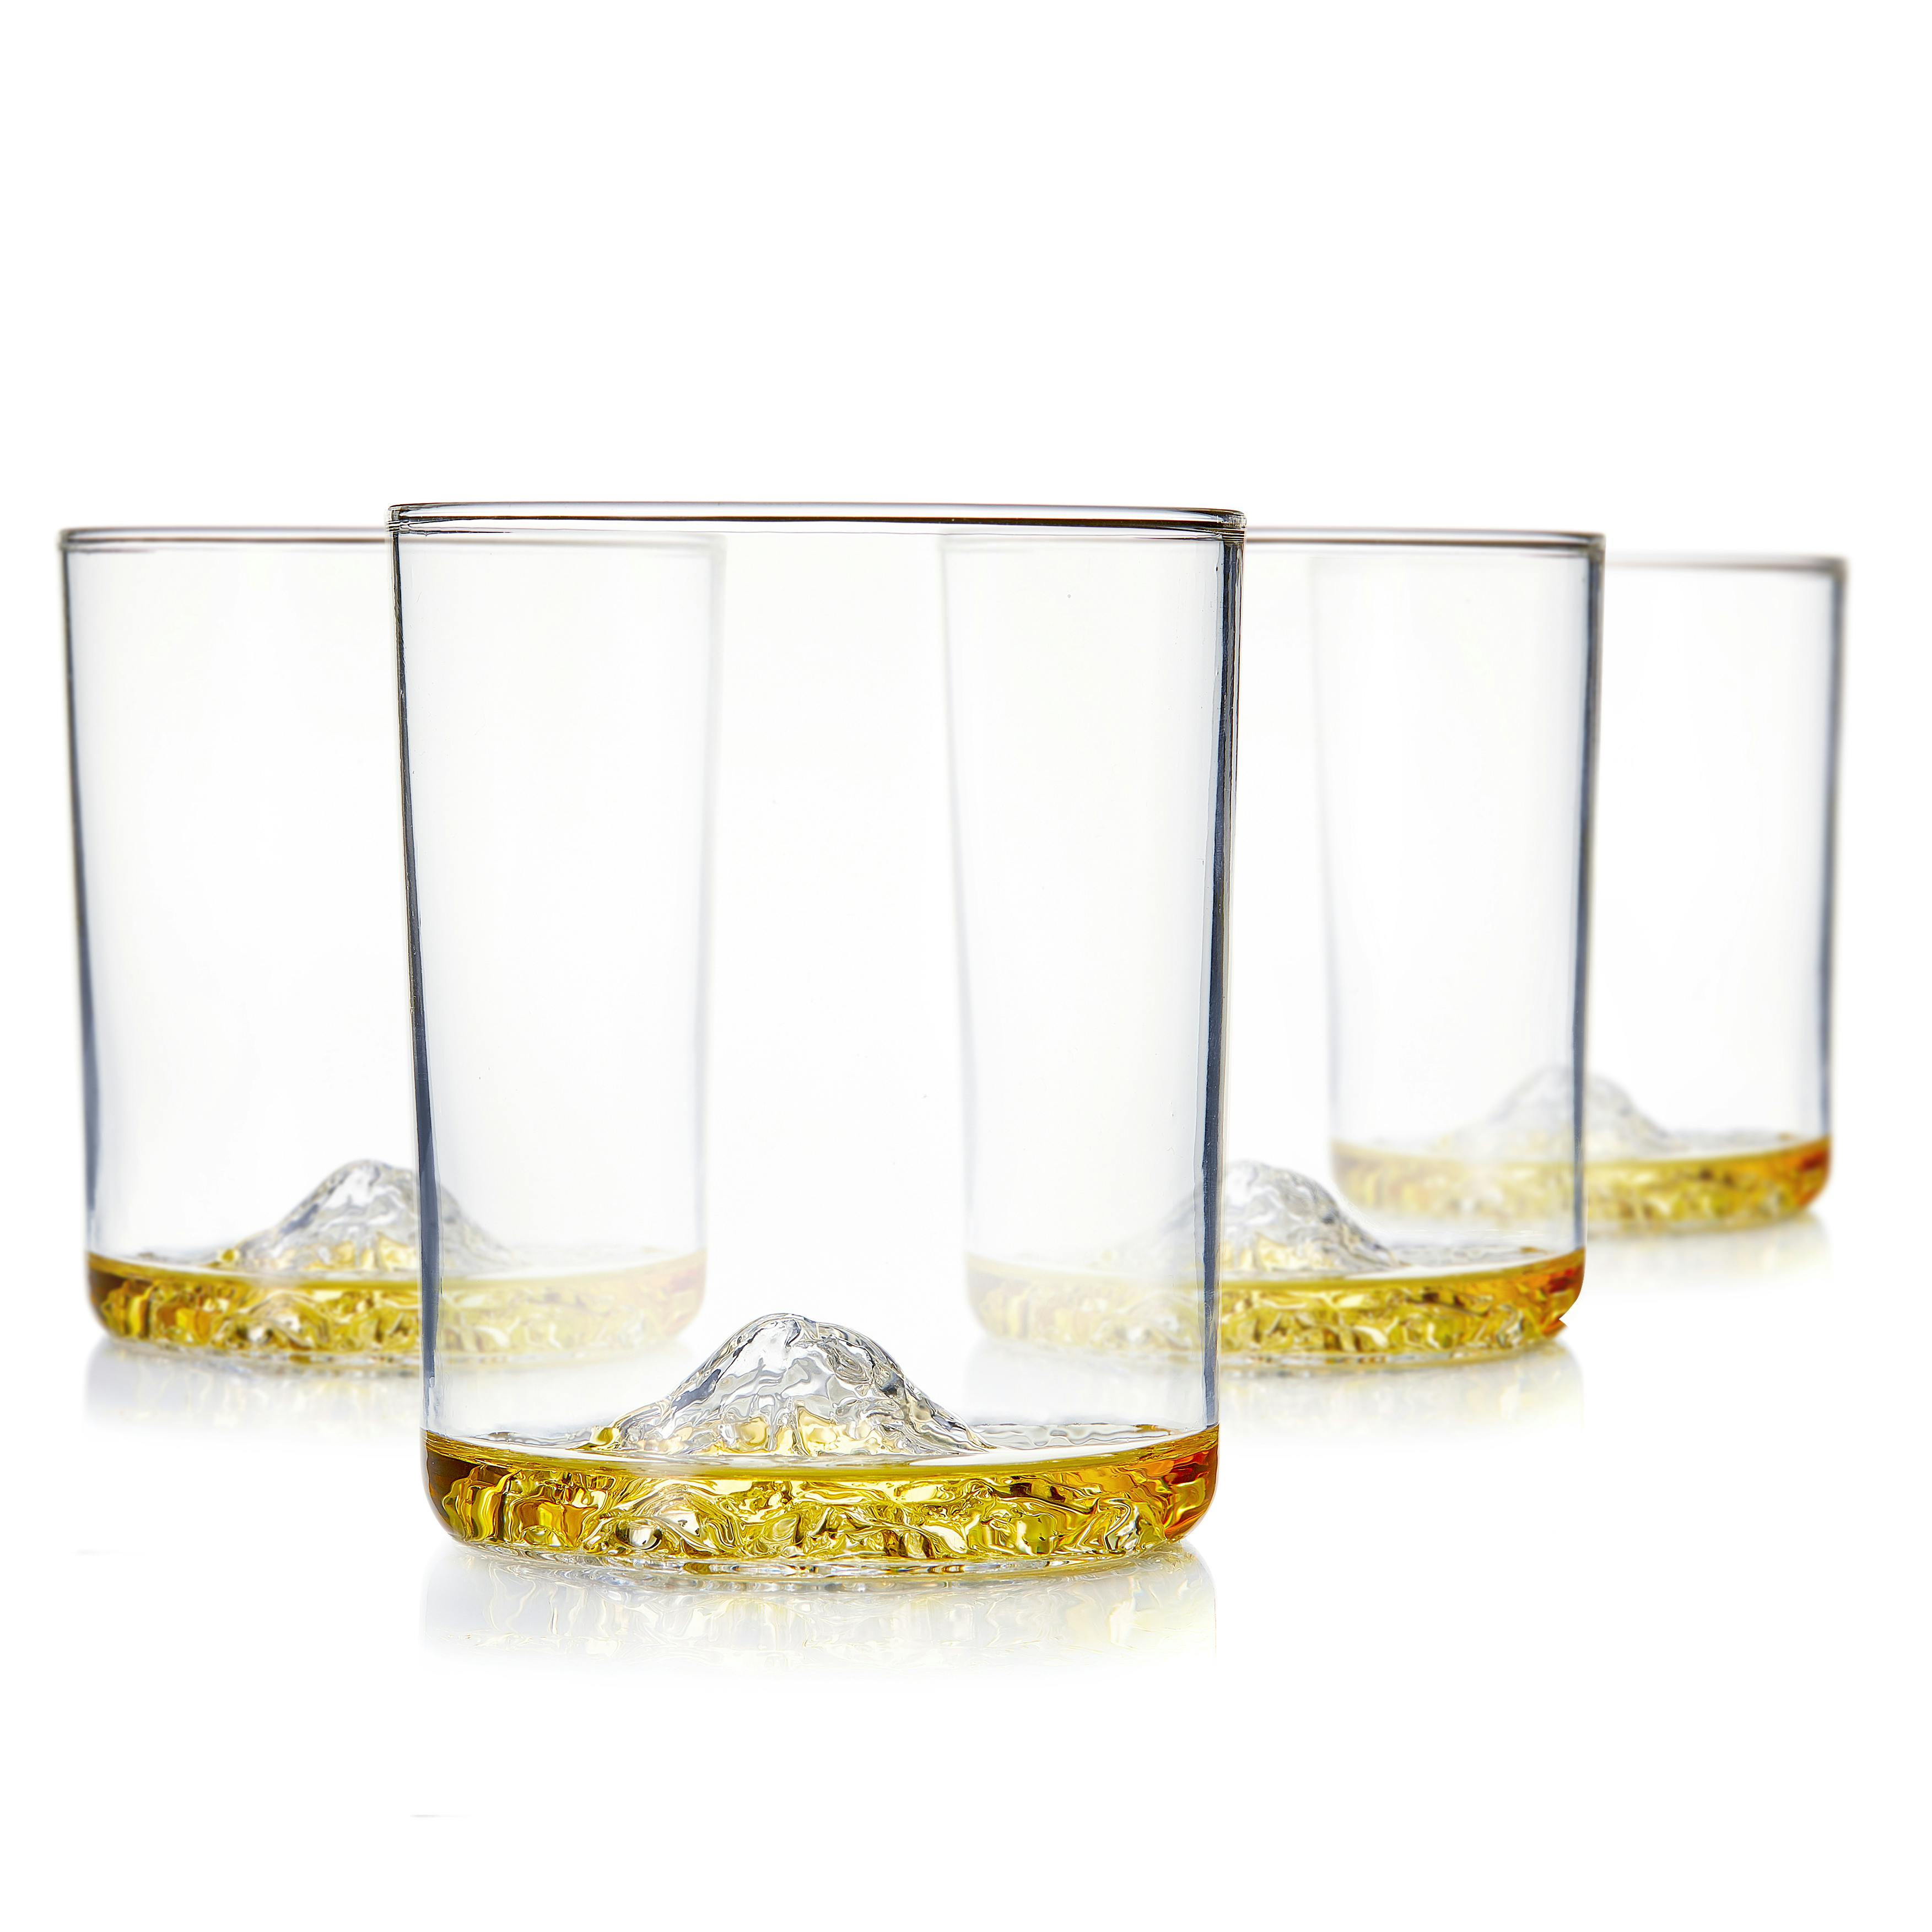 Elle Decor Set of 4 Water Drinking Glasses, 12 oz Whiskey Tumblers, Clear Glass Cups with Heavy Weighted Colored Base, Blue Base